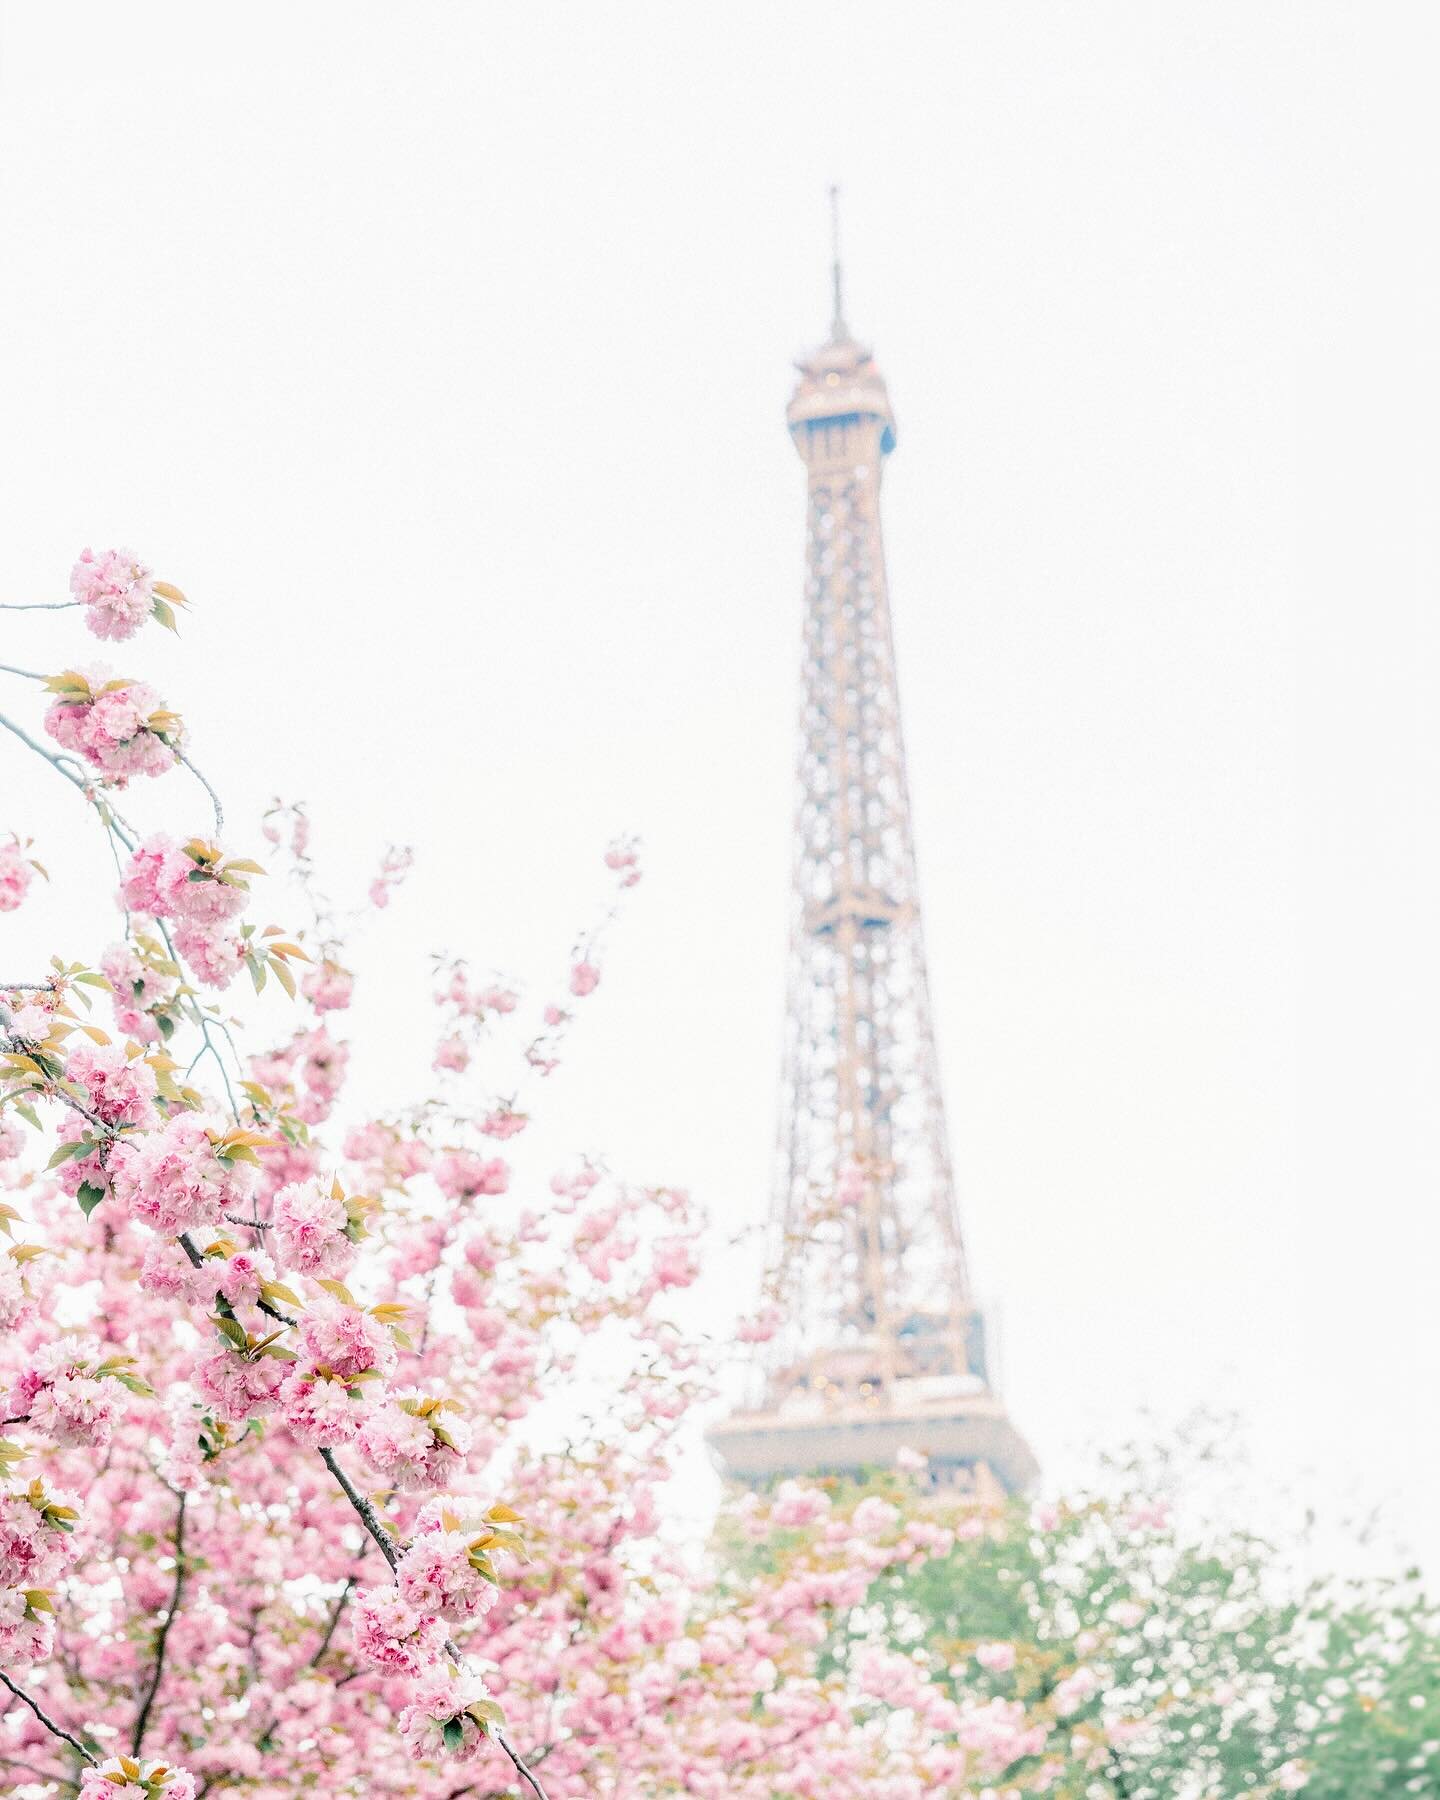 Magical Paris in the springtime 🌸 

Happy first day of spring! We got so lucky to see the cherry blossoms last spring in Paris. What a dream! Brighter, greenery, more floral-y days are ahead 💕 

#paris #firstdayofspring #parisfrance #cherryblossoms